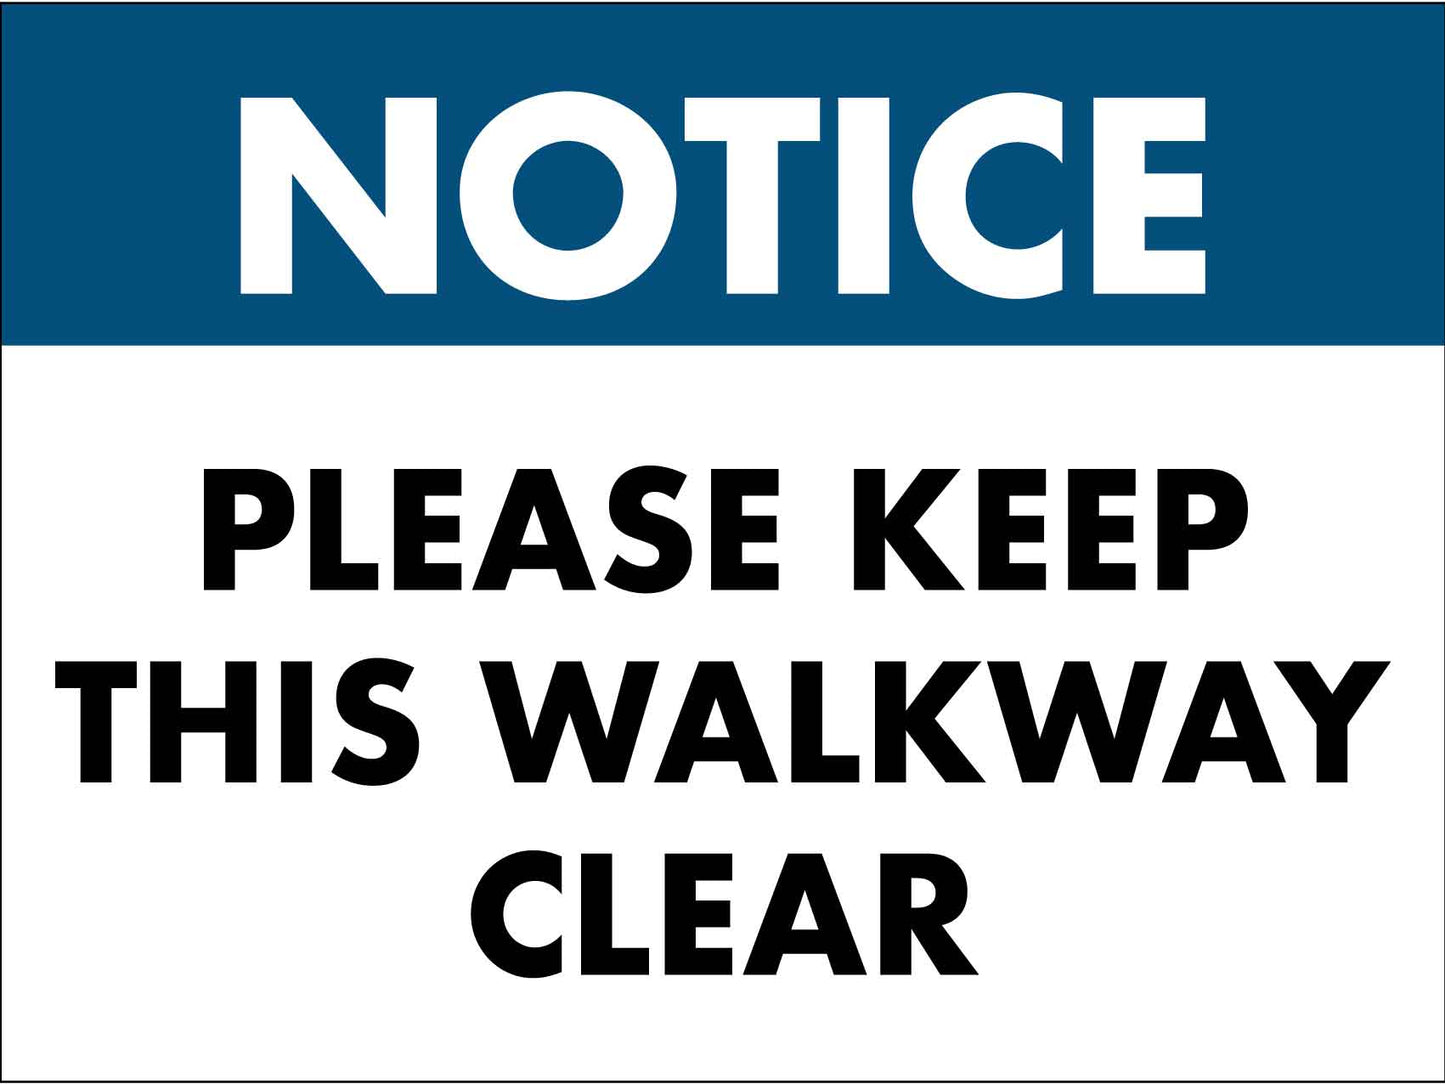 Notice Please Keep This Walkway Clear Sign